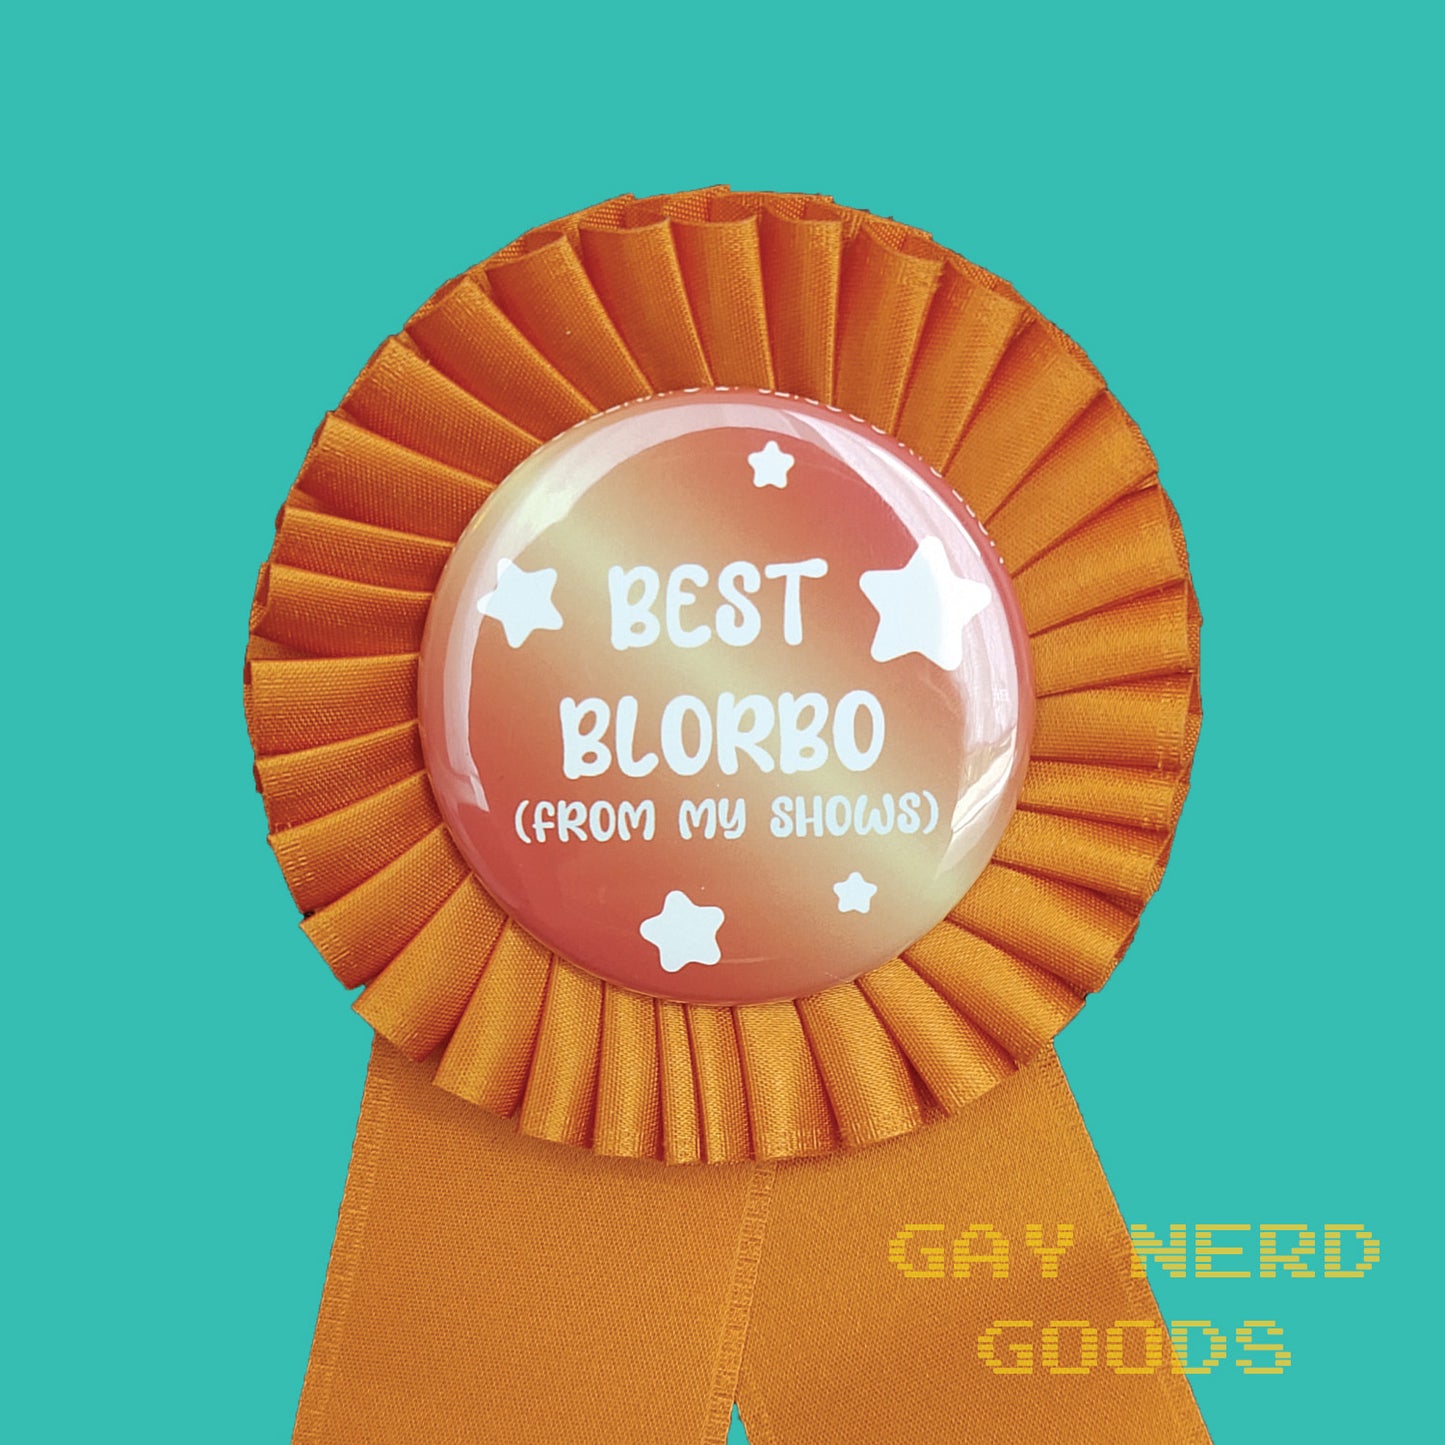 detail shot of central button of the best blorbo award ribbon. The text says "best blorbo (from my shows)" in white surrounded by stars. They're on an orange and yellow gradient button surrounded by orange satin ribbon